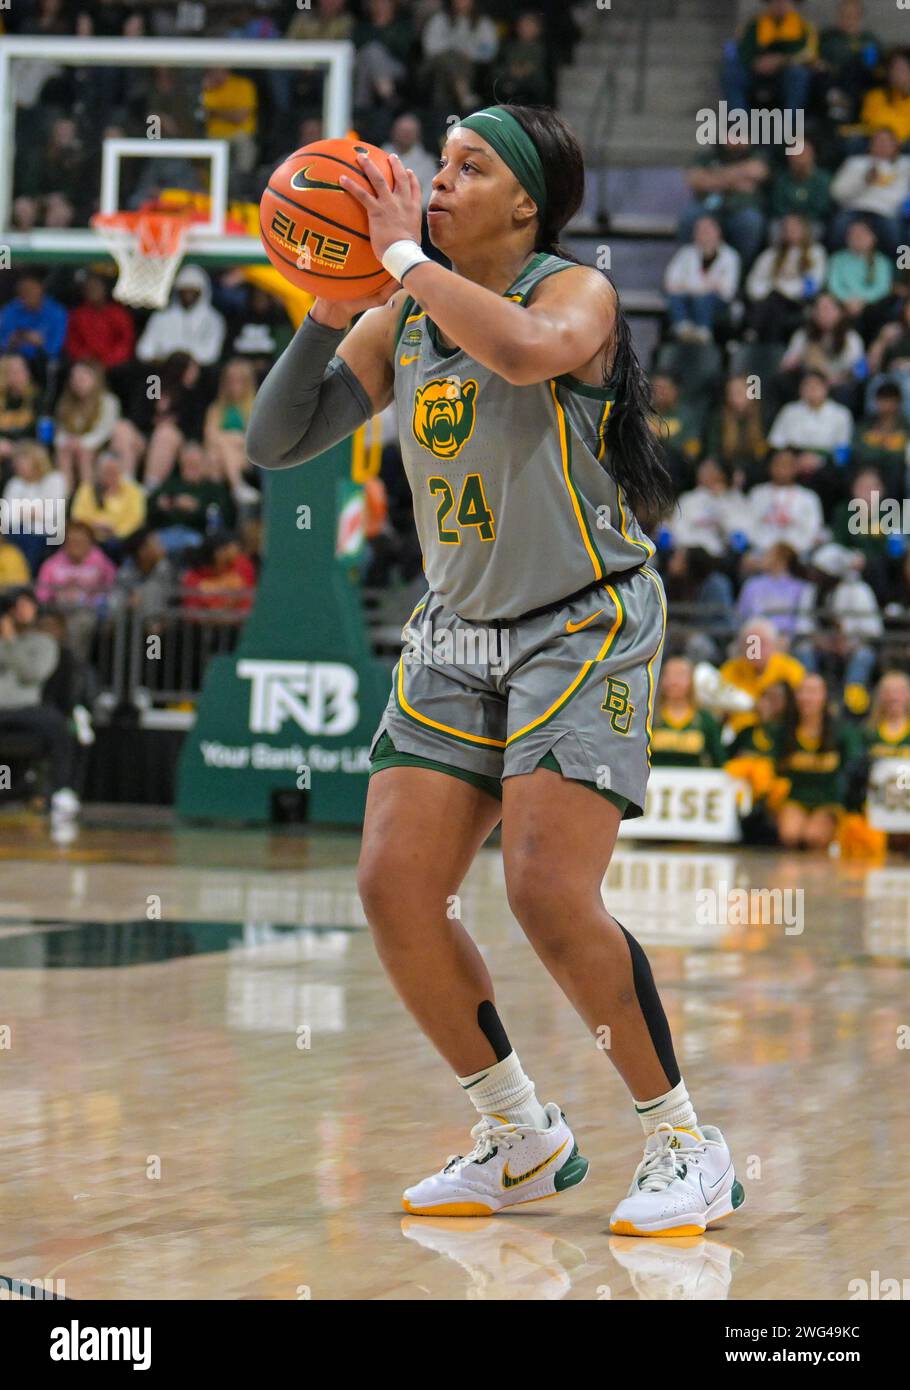 February 1 2024: Baylor Lady Bears guard Sarah Andrews (24) shoots the ball during the 1st half of the NCAA Basketball game between the Texas Longhorns and Baylor Lady Bears at Foster Pavilion in Waco, Texas. Matthew Lynch/CSM Stock Photo